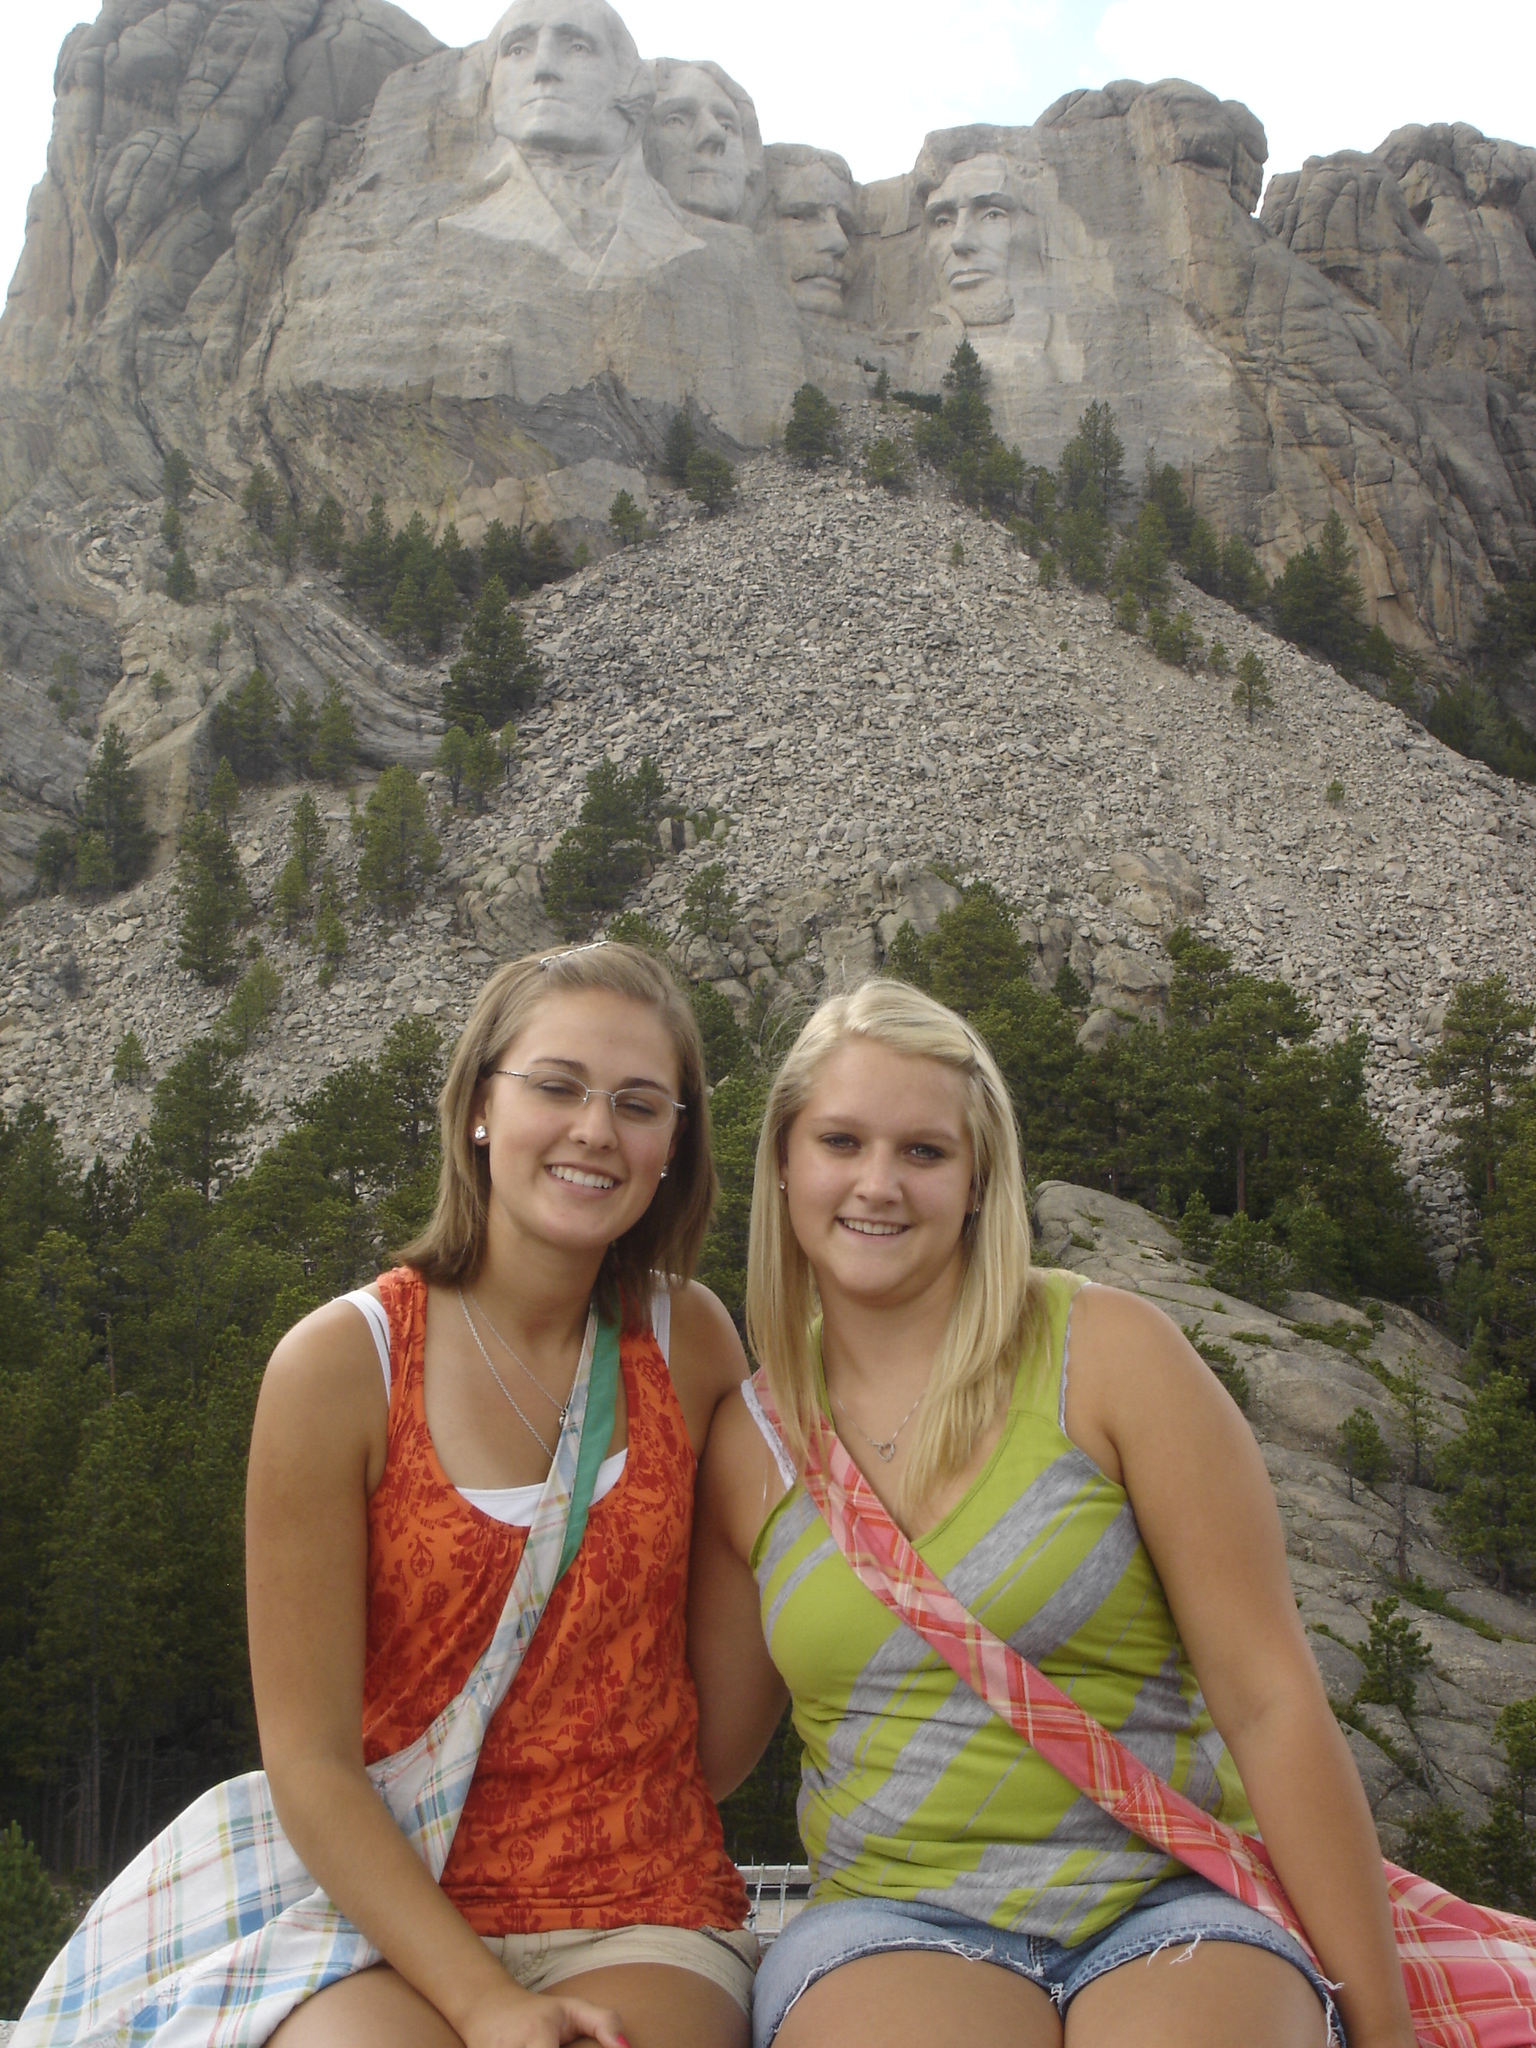 Courtney and Jenna sitting in front of Mt. Rushmore